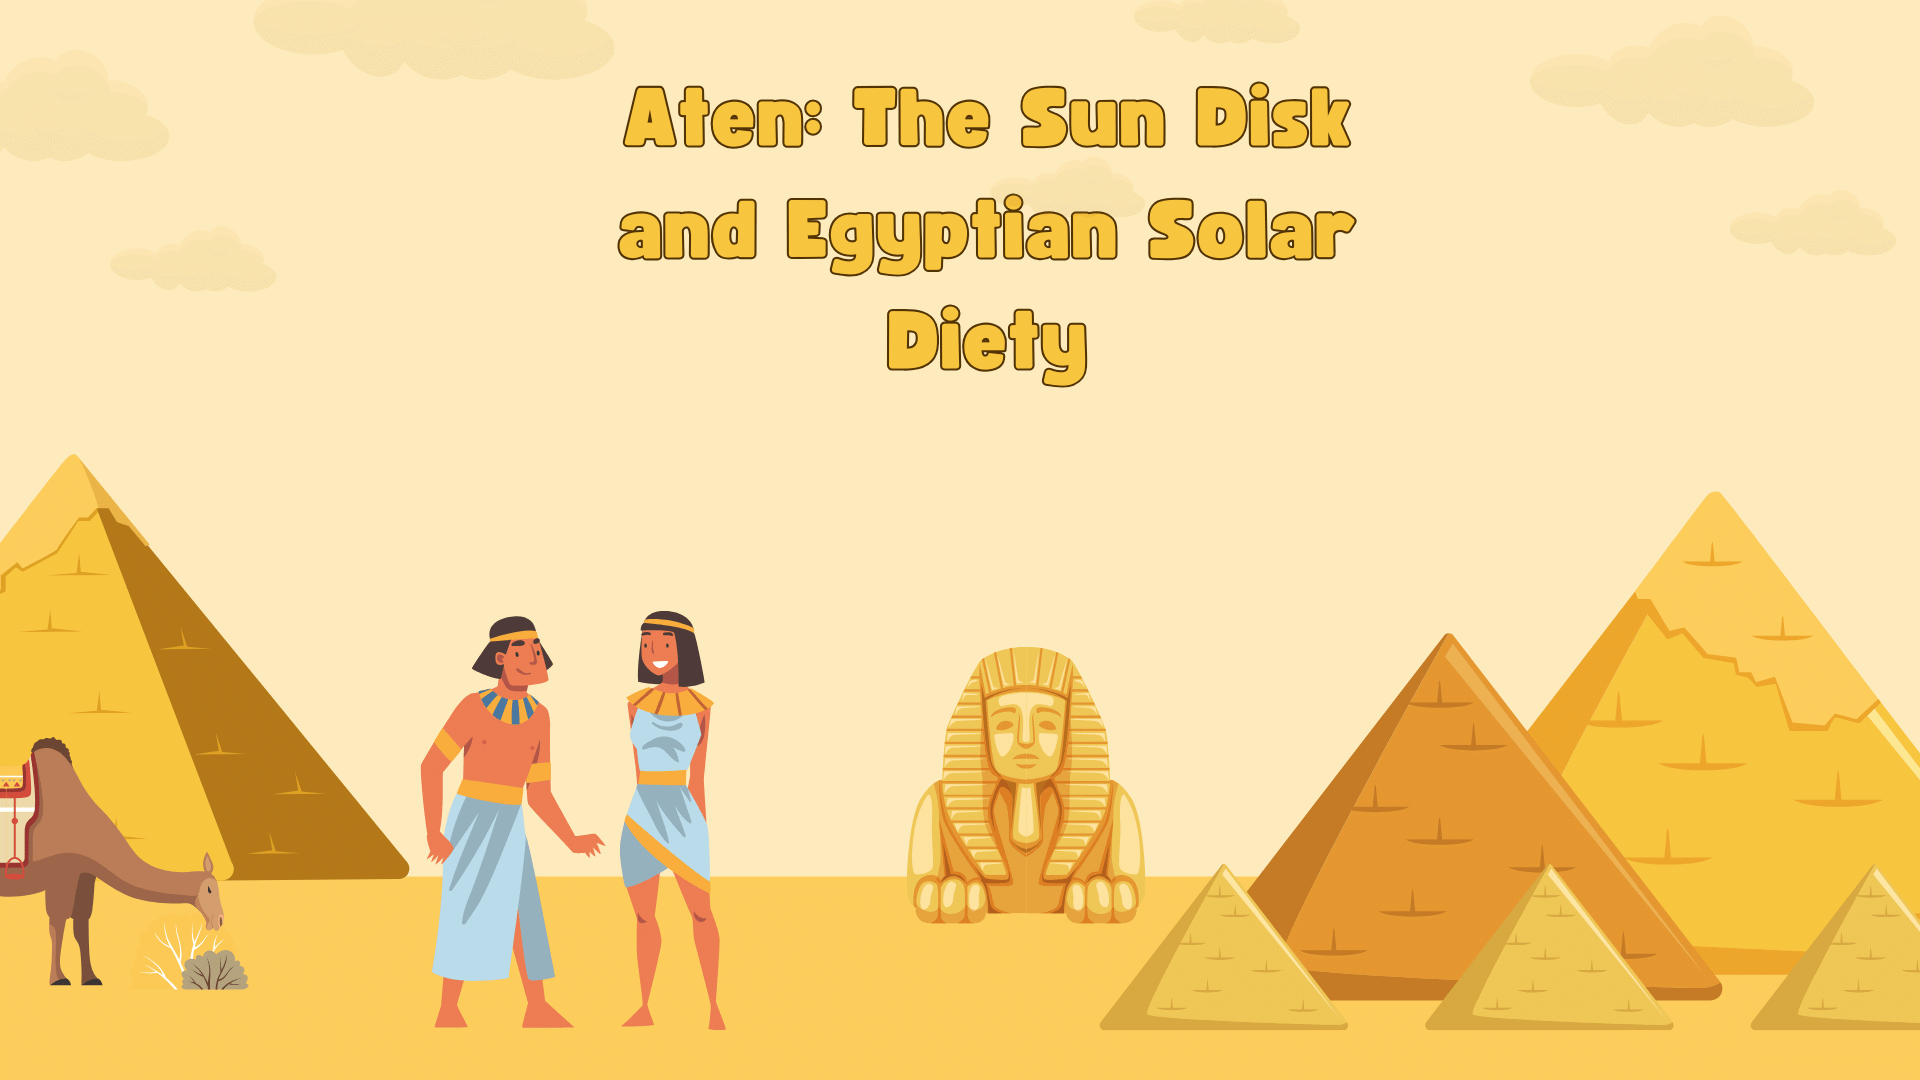 Aten: The Sun Disk and Egyptian Solar Diety